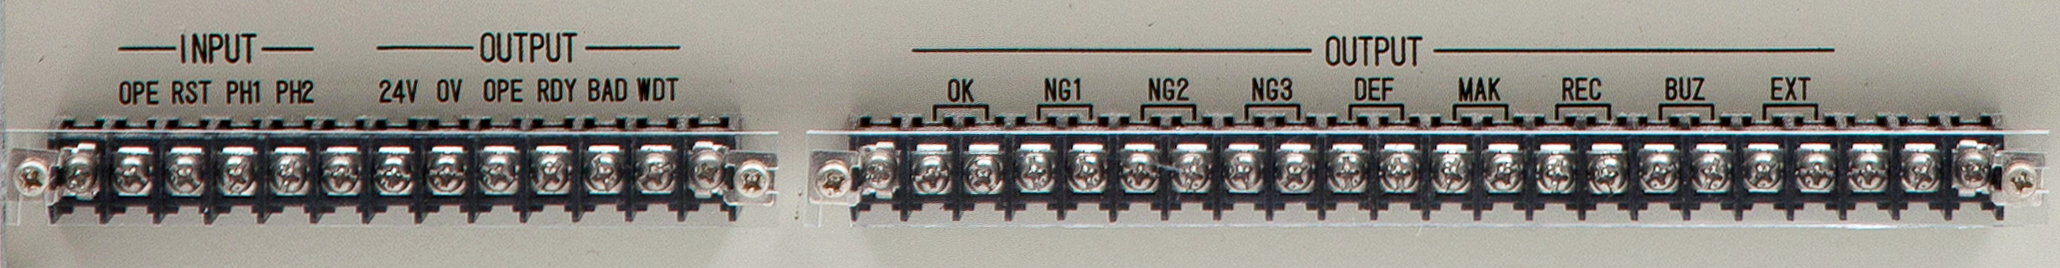 Control inputs and outputs